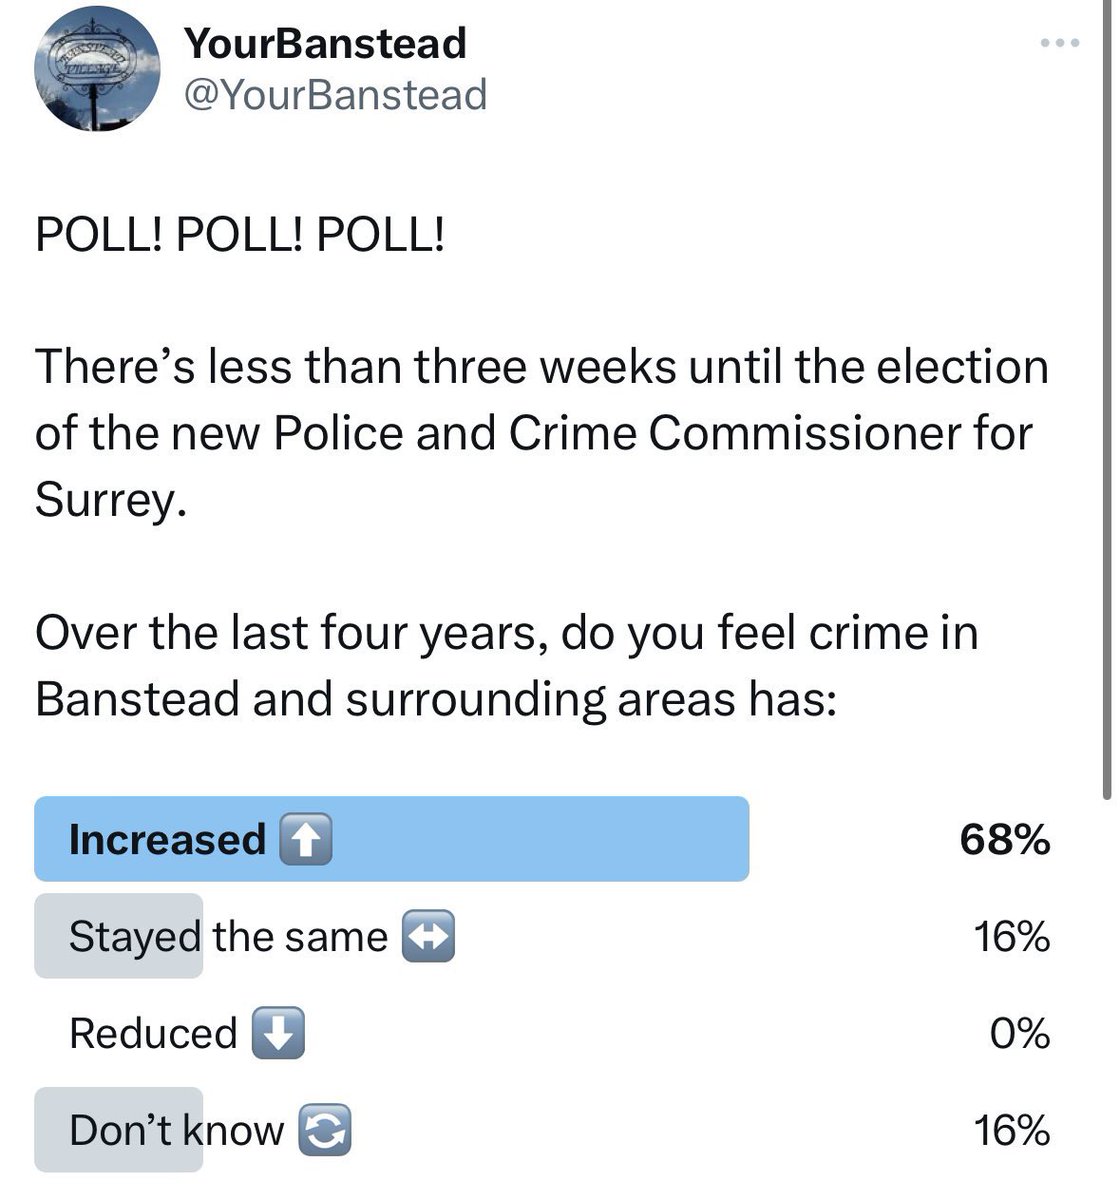 @jed_dwight @_Lisa_Townsend @Rebecca_SPaul @Conservatives @CCACllrs @ToryCanvass @Walking2Win @RBConservative Sadly, many people in Banstead, Kingswood, Woodmansterne and surrounding areas feel let down by the Surrey Police and Crime Commissioner. Here’s what they said when asked about crime levels. Not one person said they’d reduced!